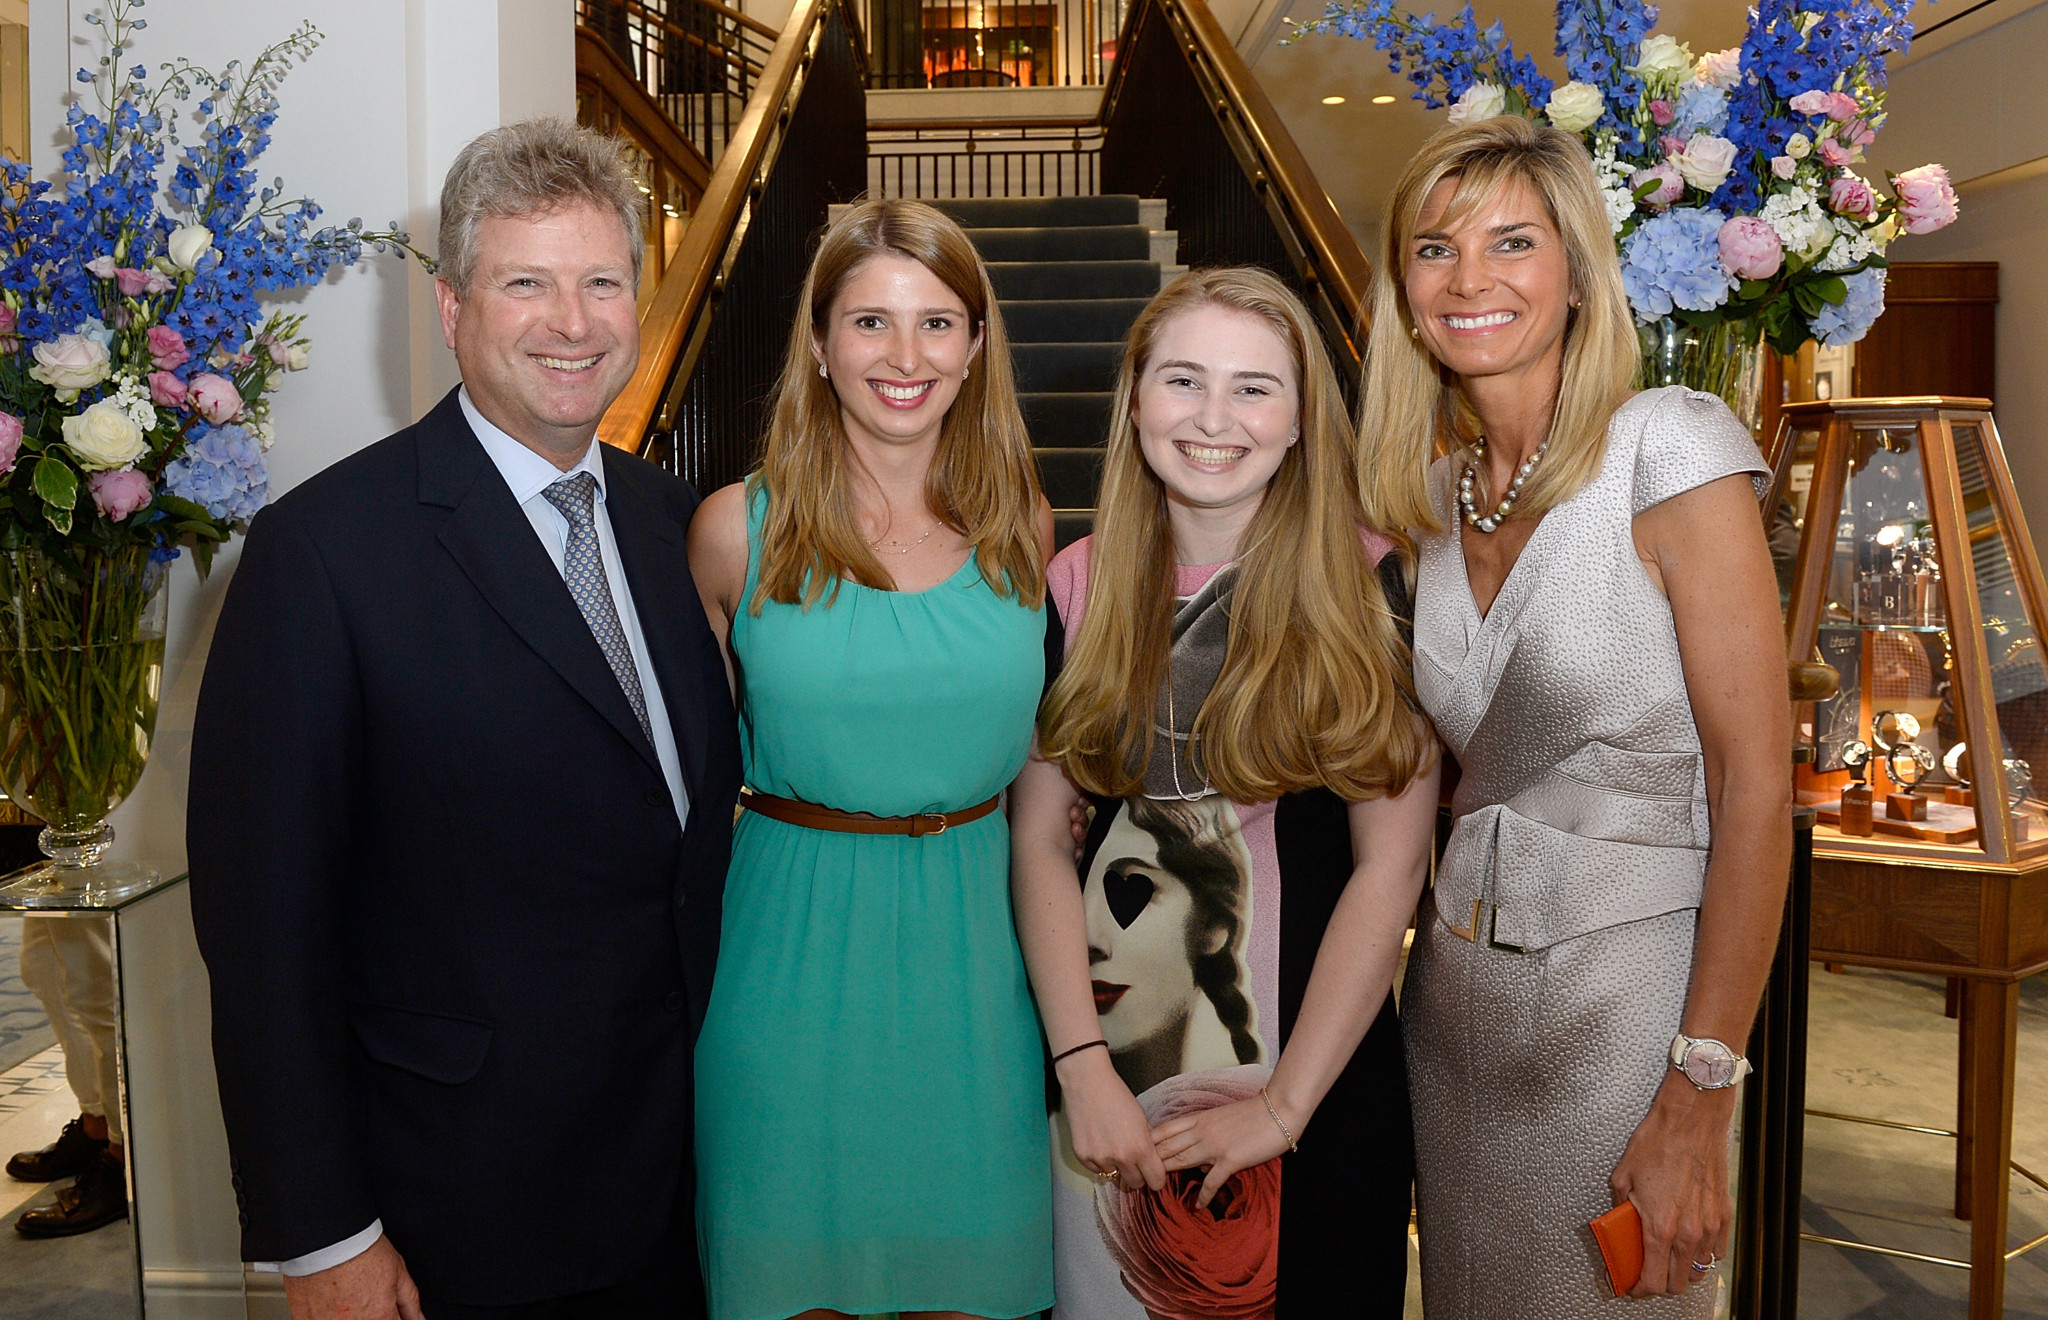 William and lucy asprey with daughters attending the william & son flagship store launch in 2015. (photo by david m. Benett/dave benett / getty images for william & son)